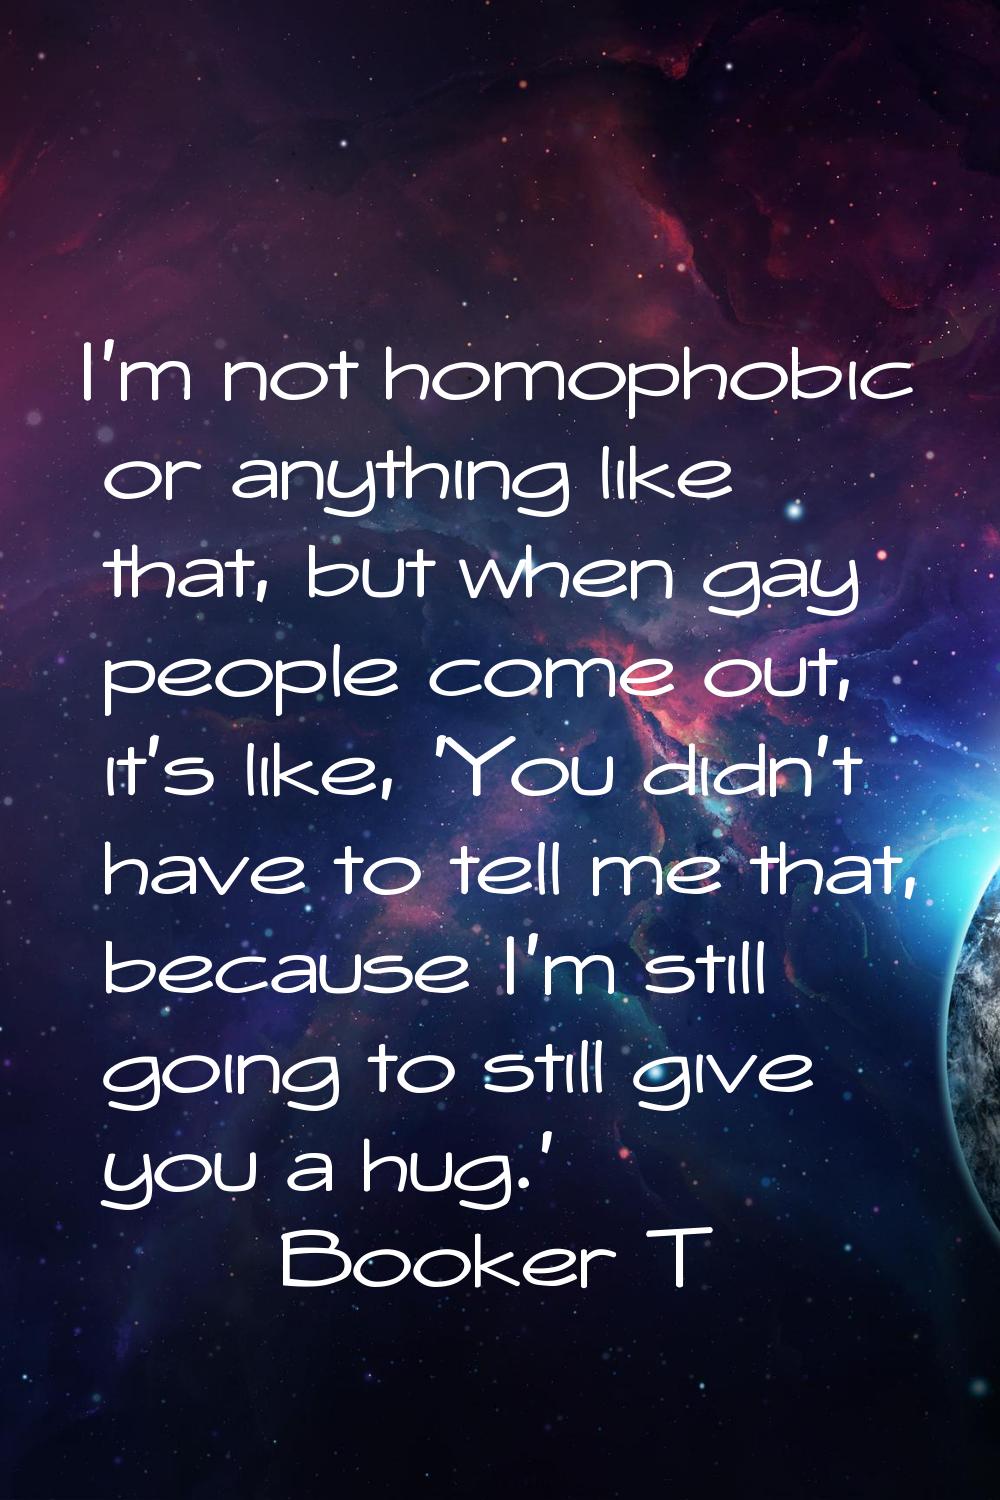 I'm not homophobic or anything like that, but when gay people come out, it's like, 'You didn't have